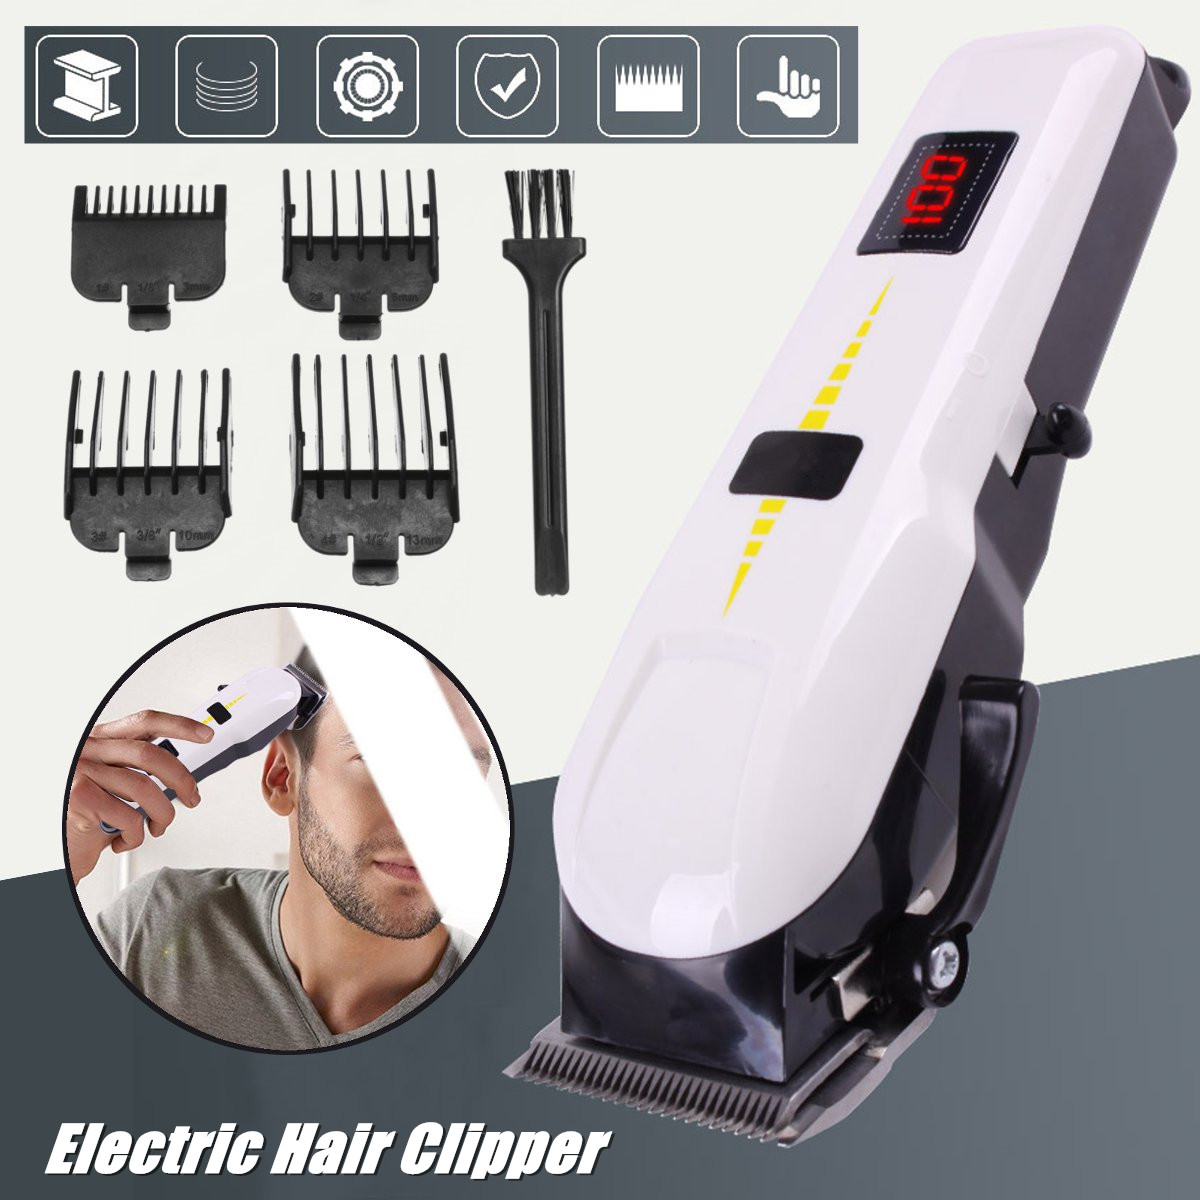 3W-Cordless-Electric-Shaver-Hair-Clipper-Rechargeable-Trimmer-Haircut-Machine-LED-Display-1409954